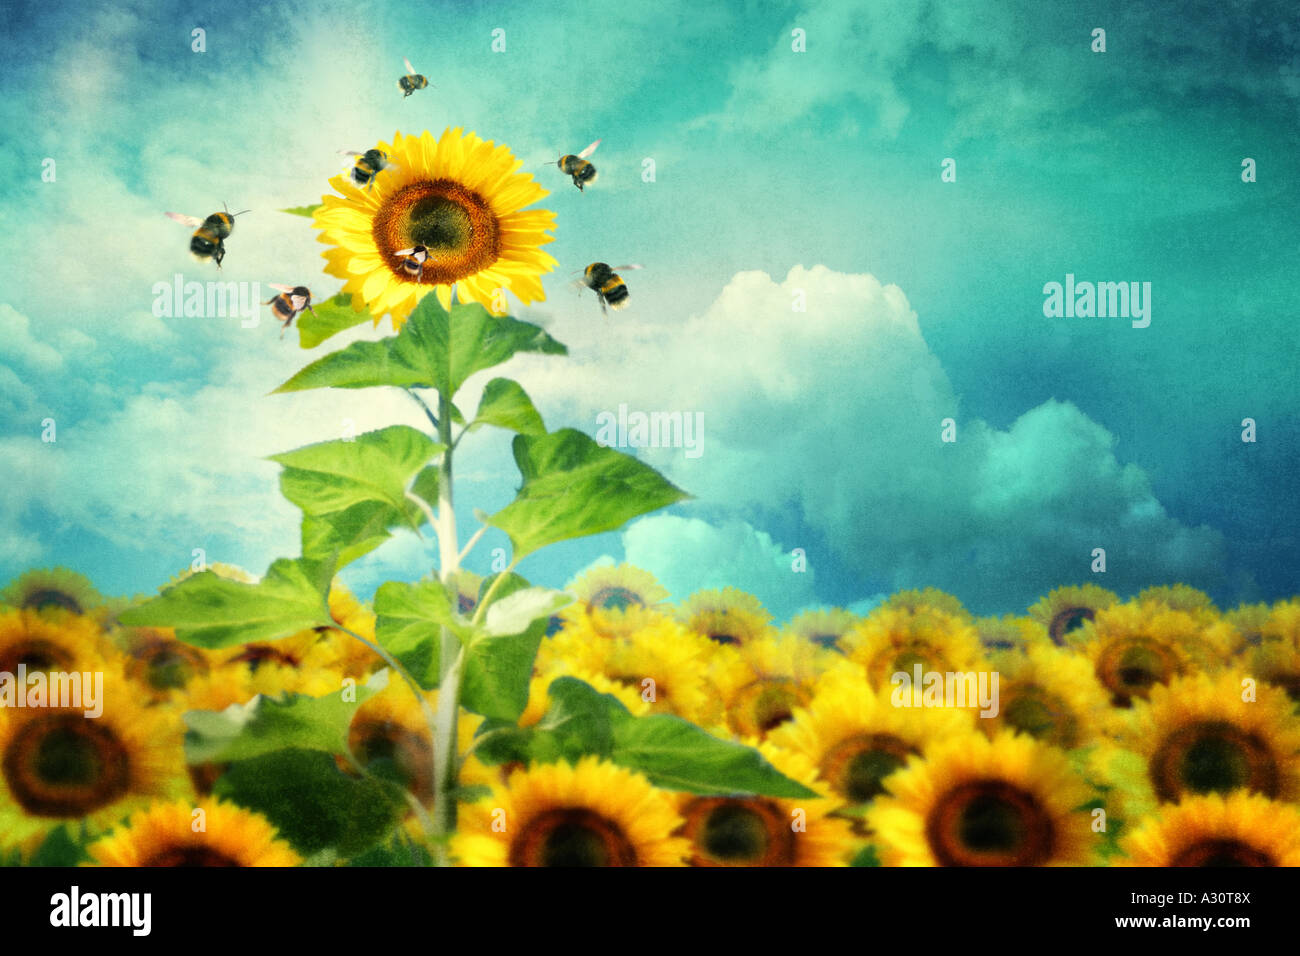 concept image of a tall sunflower standing out and attracting more bees Stock Photo